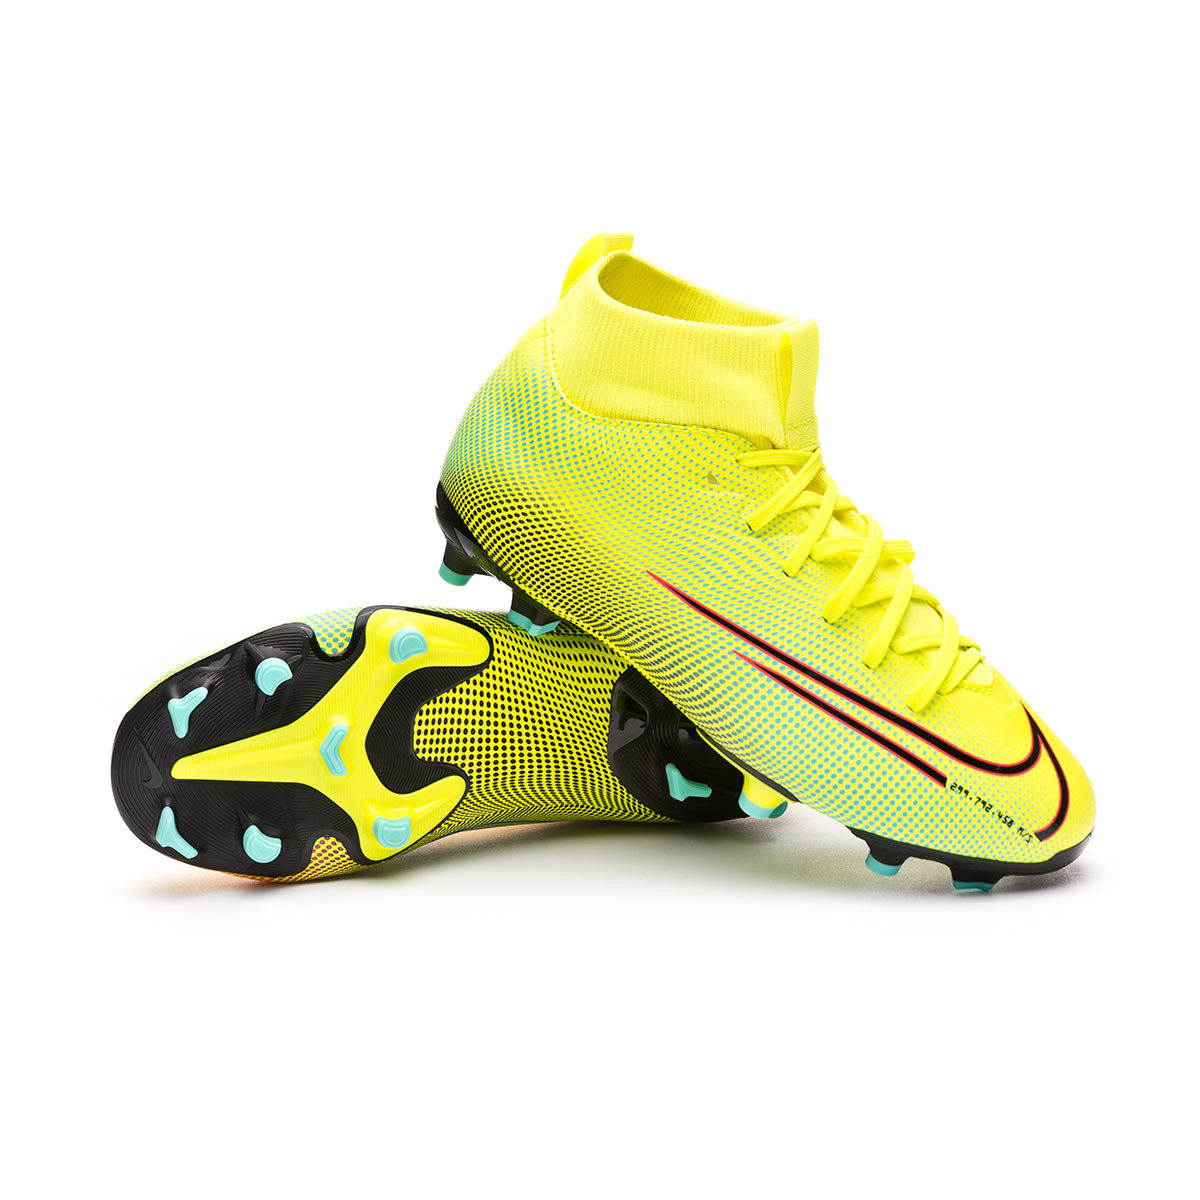 mercurial superfly 7 academy mds fg/mg